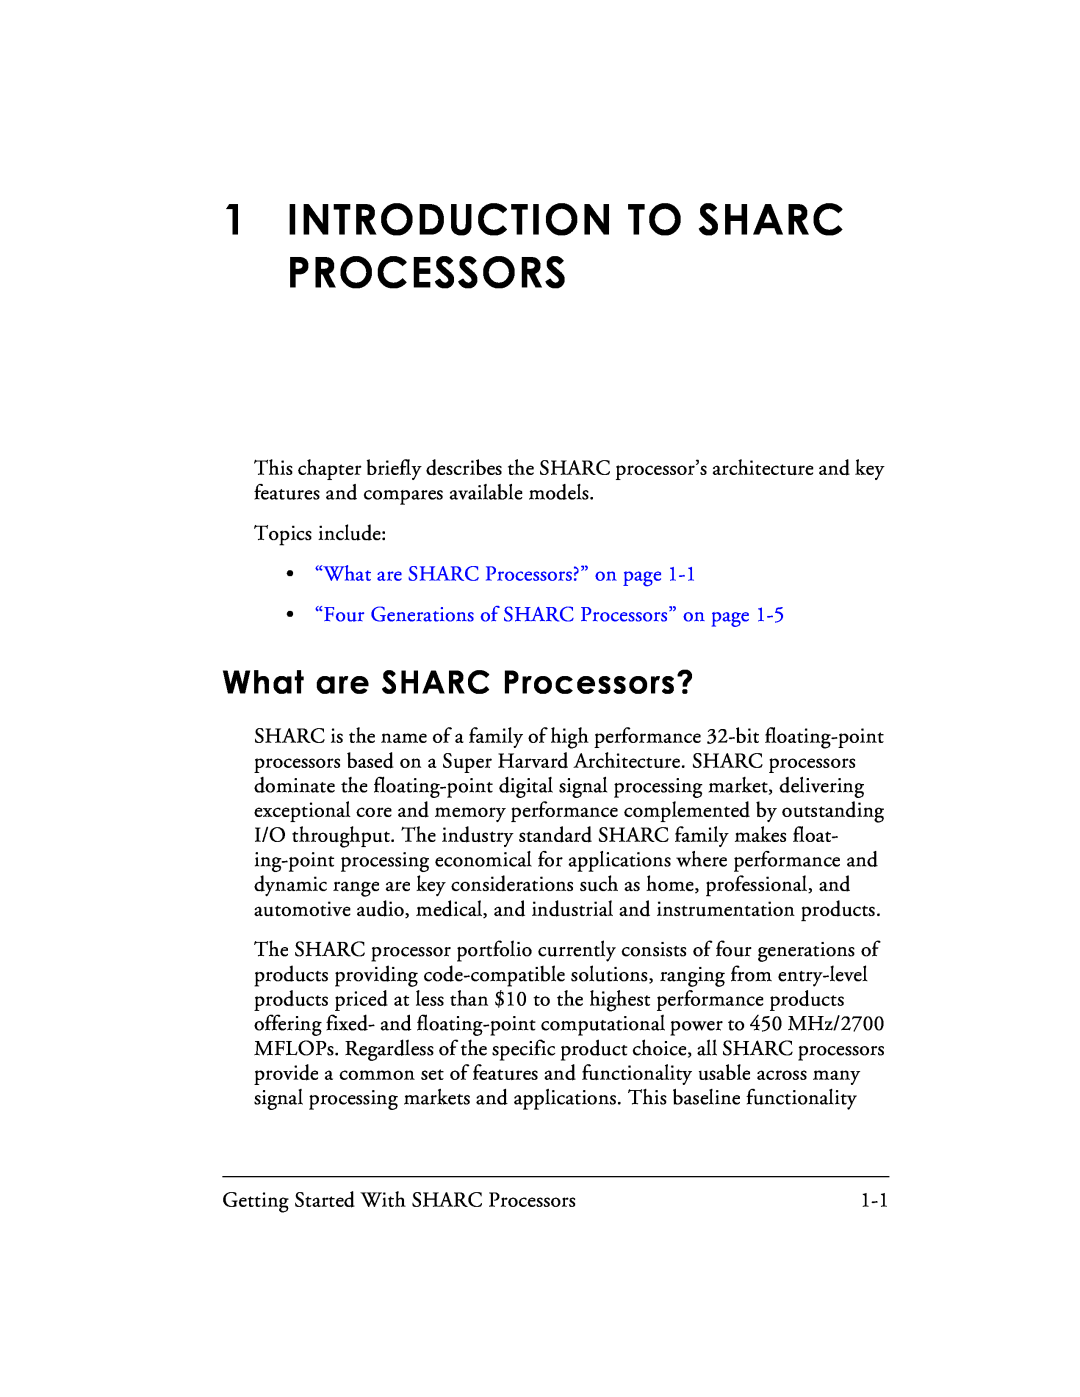 Analog Devices 82-003536-01 manual 1INTRODUCTION TO SHARC PROCESSORS, What are SHARC Processors? 